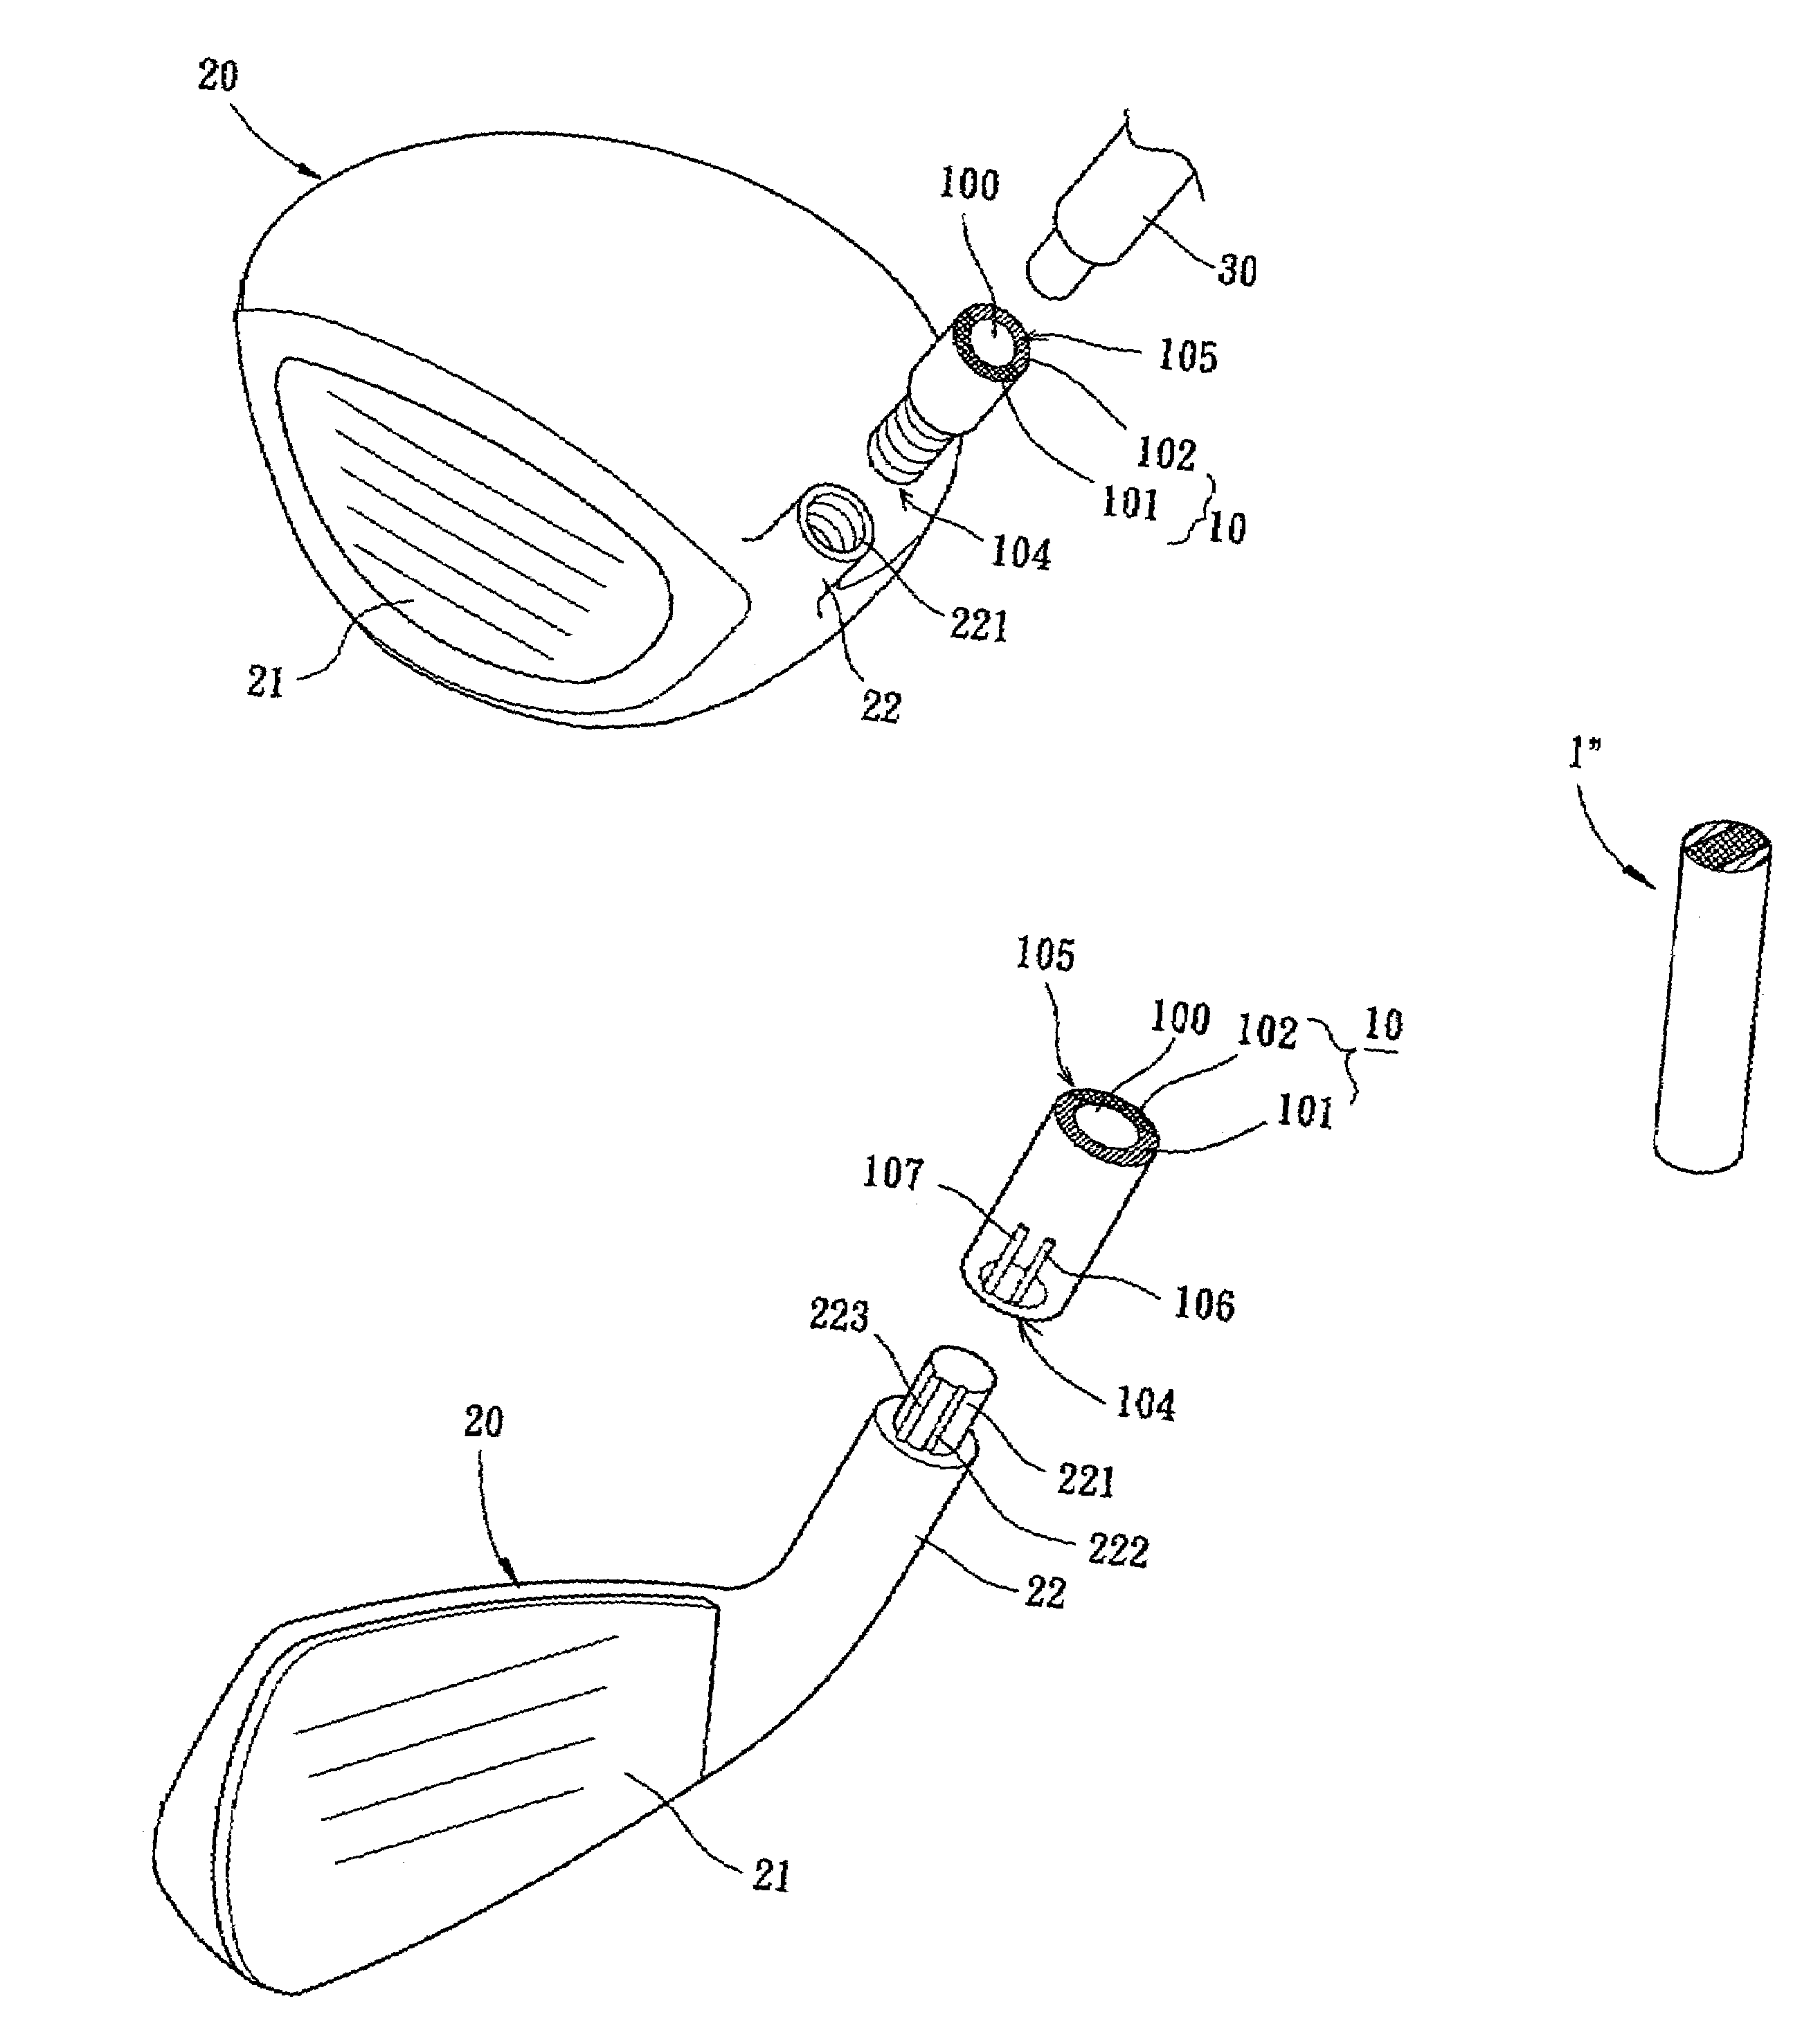 Complex hosel structure for a golf club head having a high degree of vibrational absorbability and elastic deformability